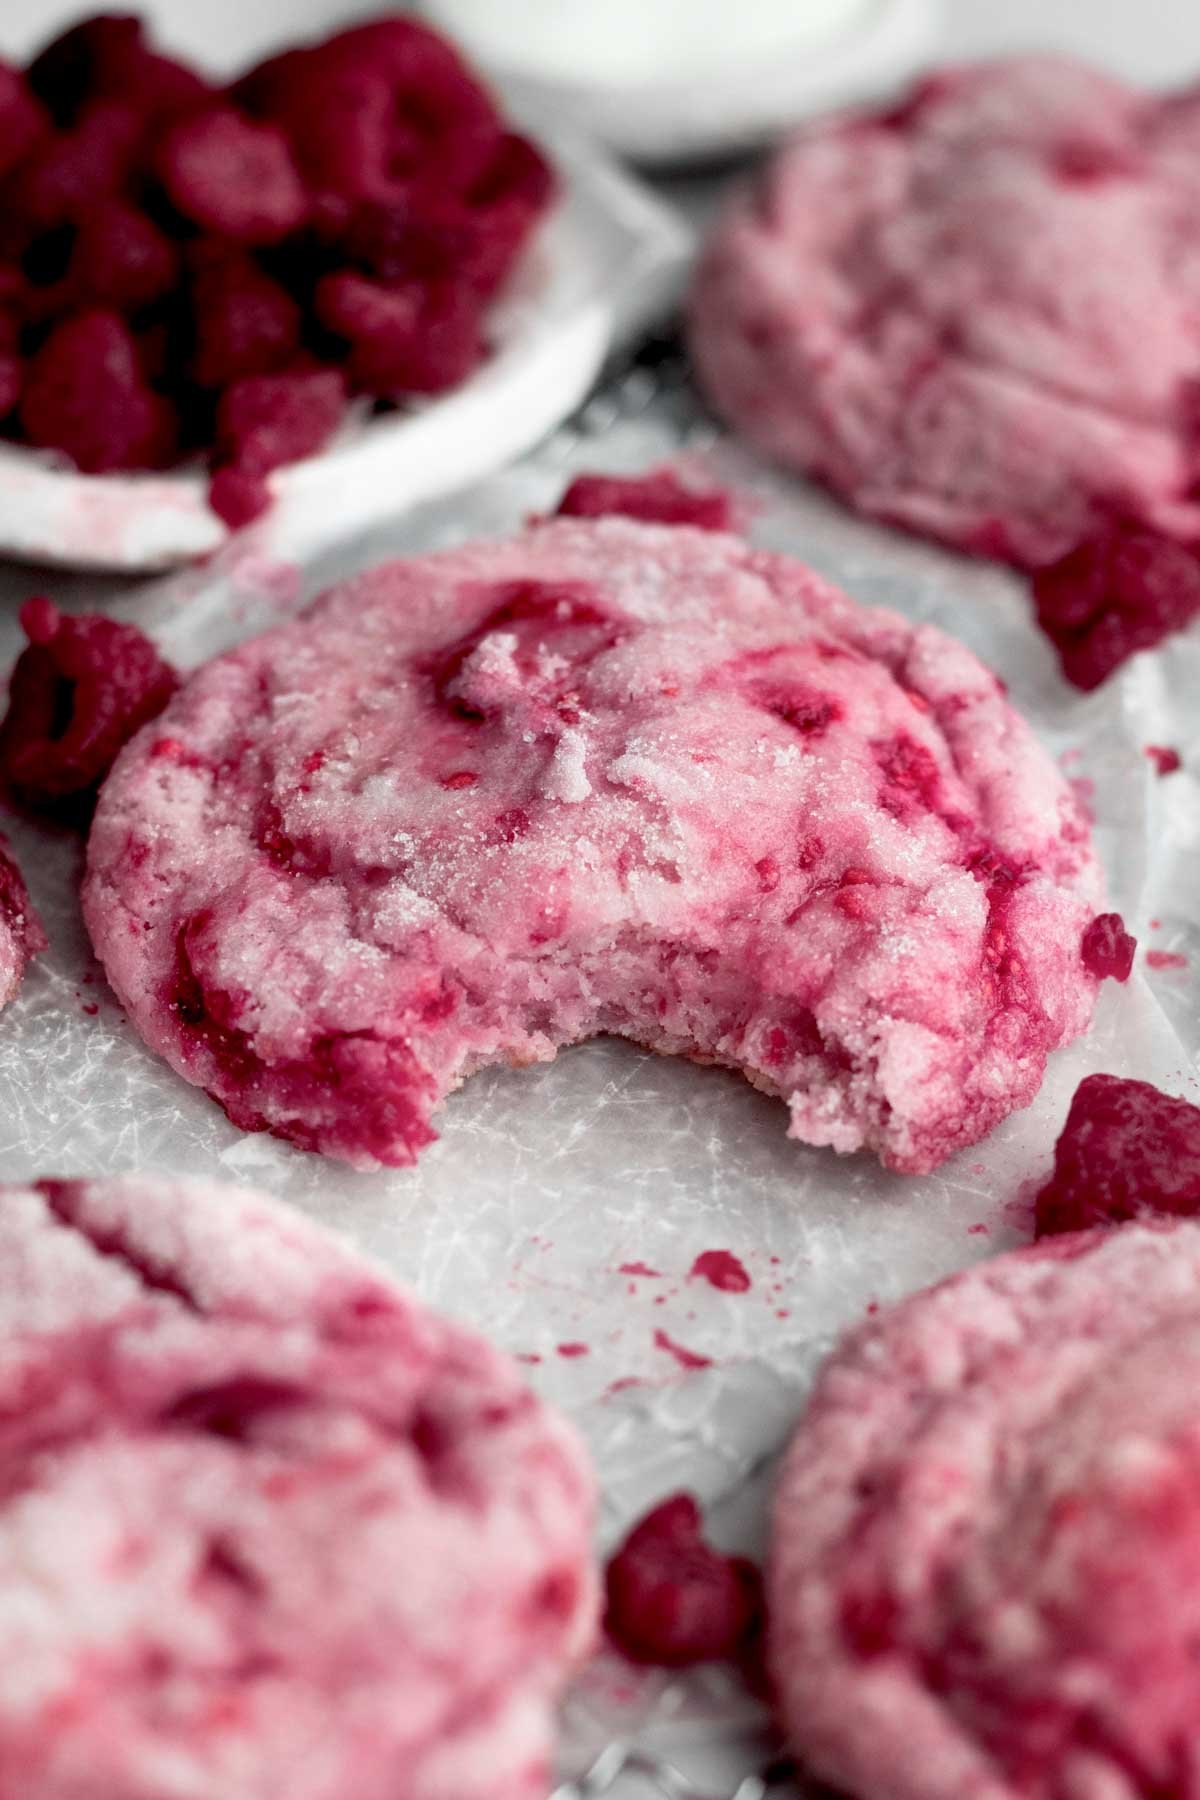 The perfect bite out of this Raspberry Cookie reveals its soft interior guarded by sugar-coated perfection.